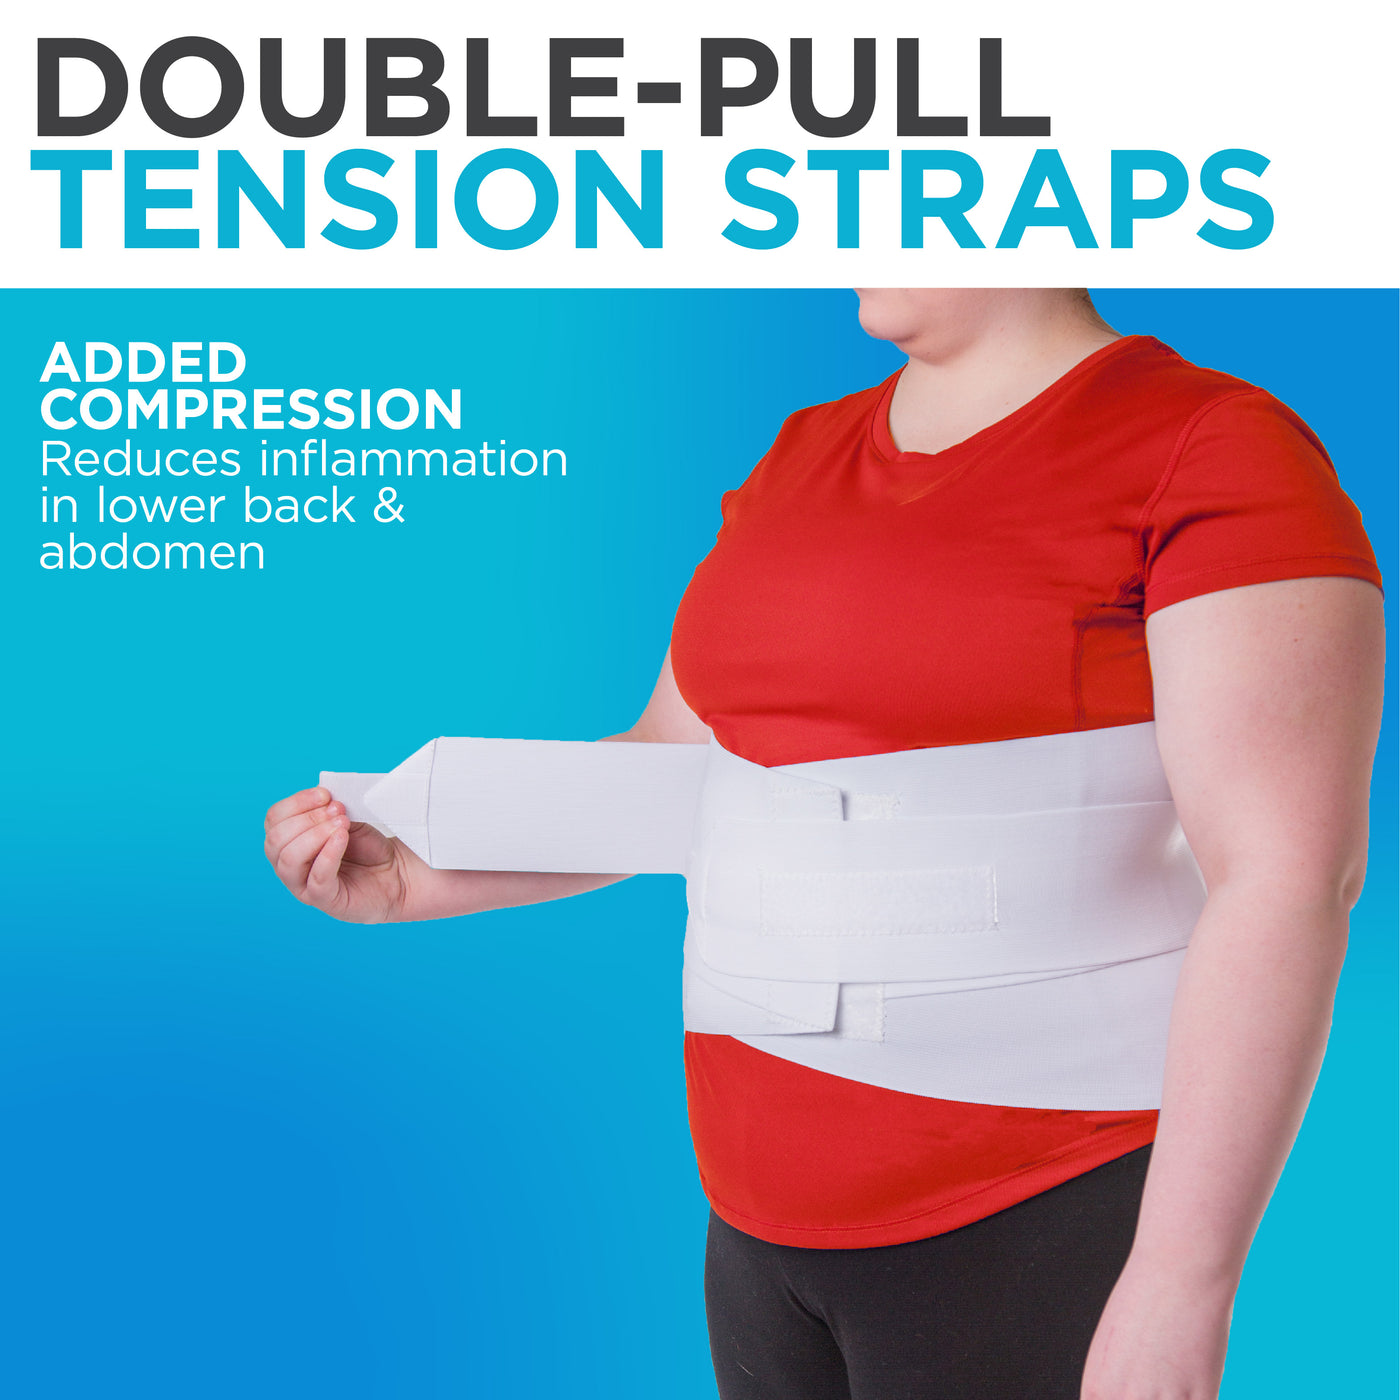 Plus Size Bariatric Back Brace with Discoloration from Sun Exposure (FINAL SALE)